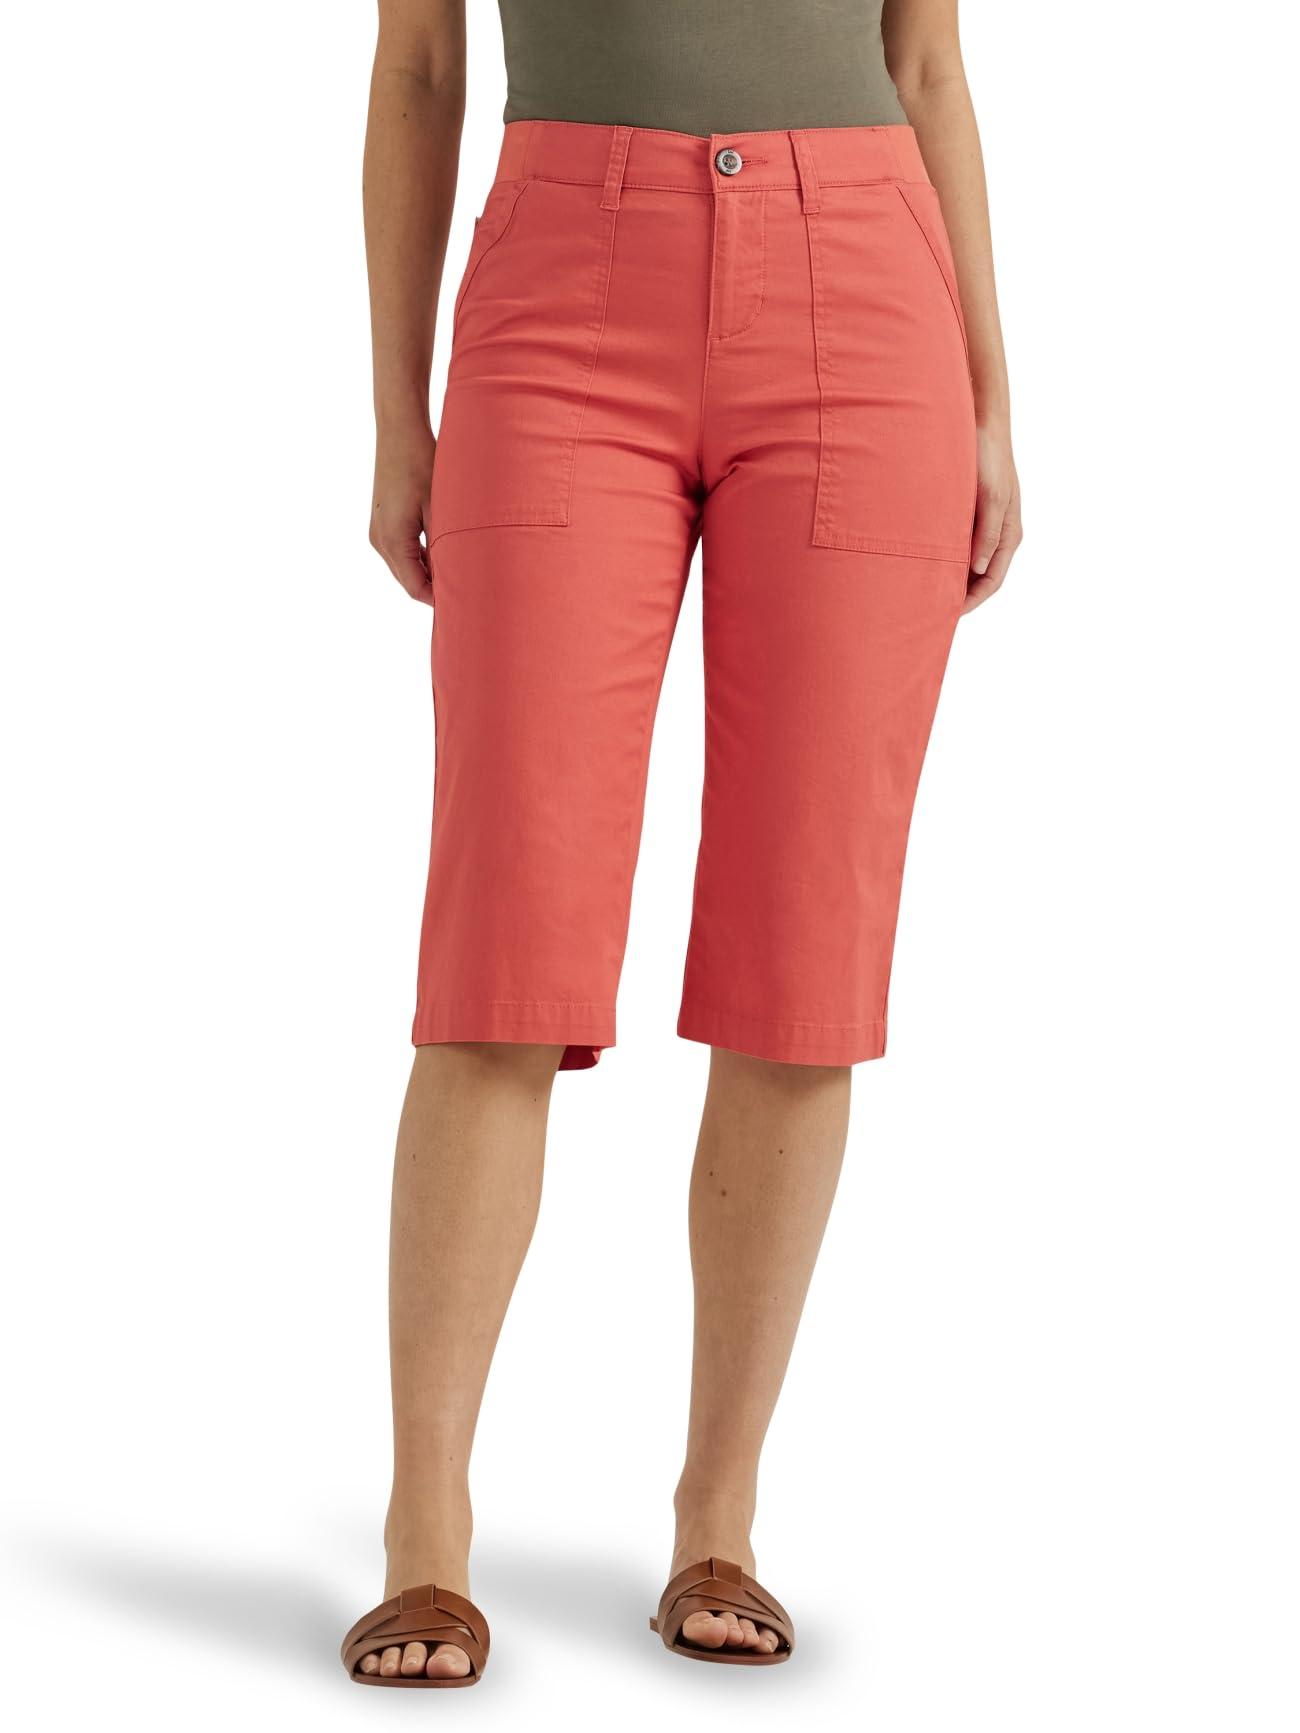 Lee Jeans Ultra Lux Comfort With Flex-to-go Utility Skimmer Capri Pant in  Red | Lyst